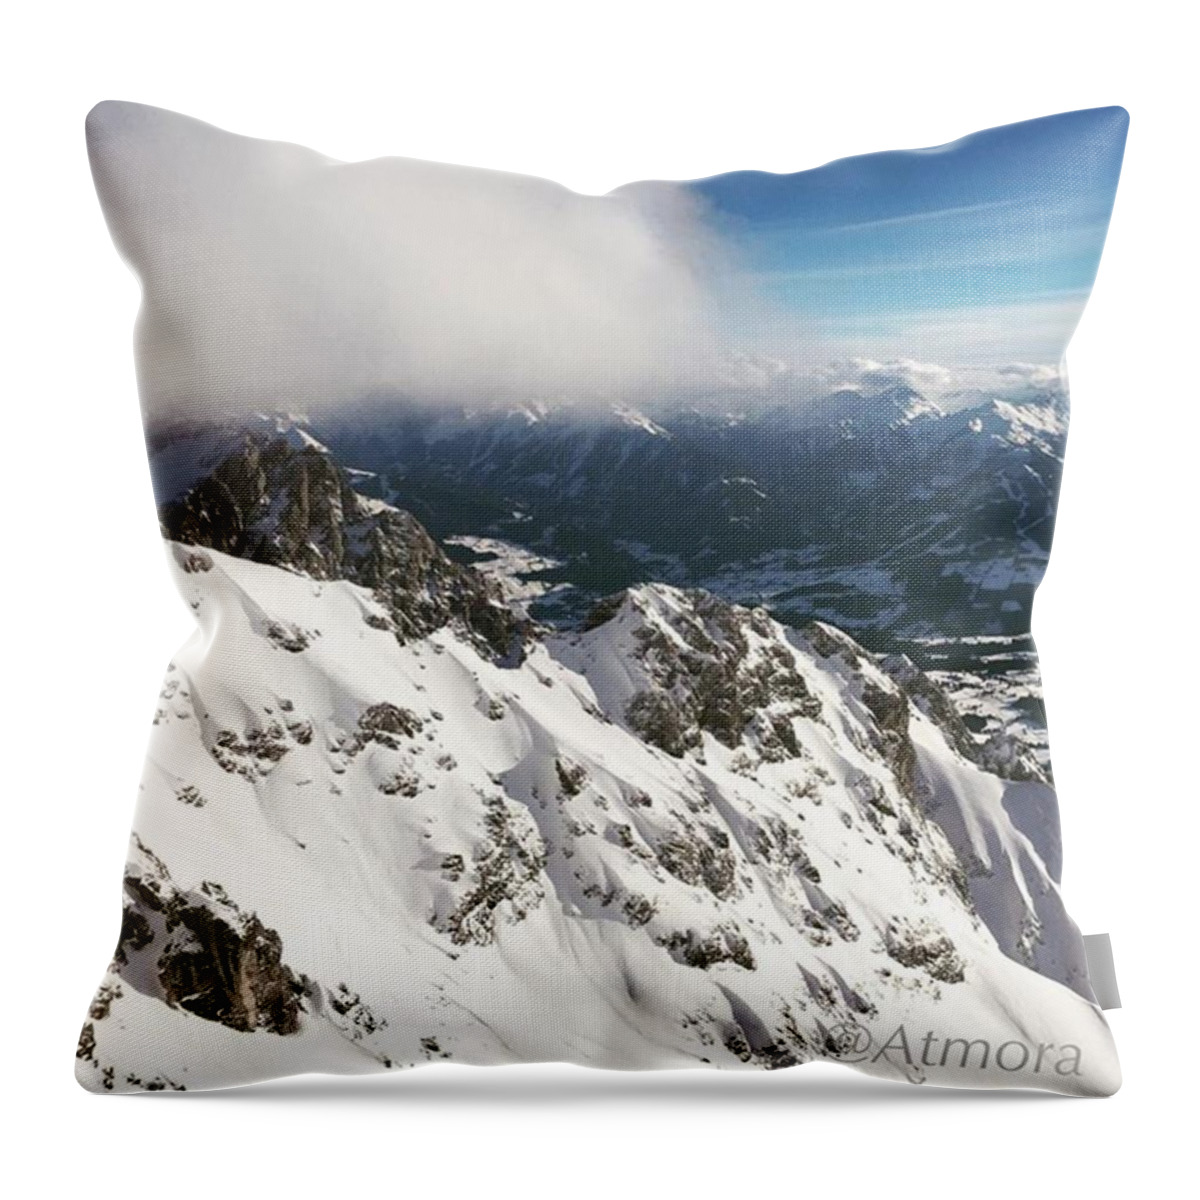 Sonne Throw Pillow featuring the photograph Simply Breathtaking by M K